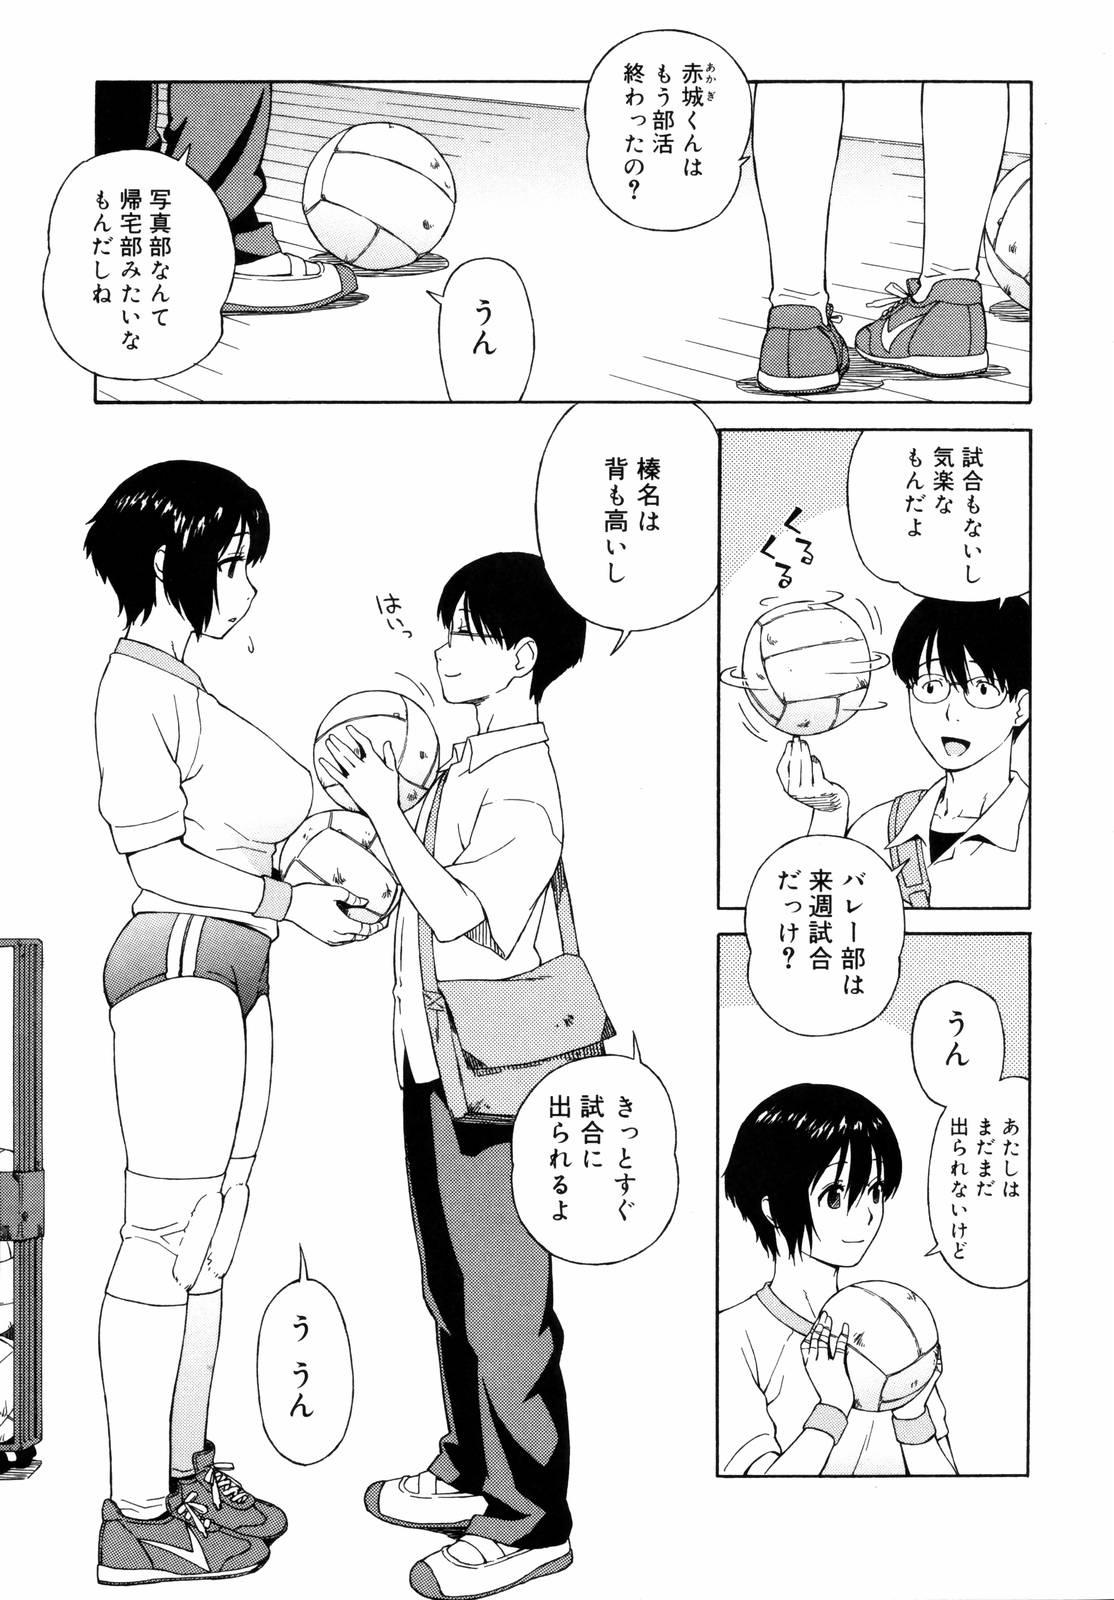 Farting Shishunki wa Hatsujouki. - Adolescence is a sexual excitement period. Viet Nam - Page 11